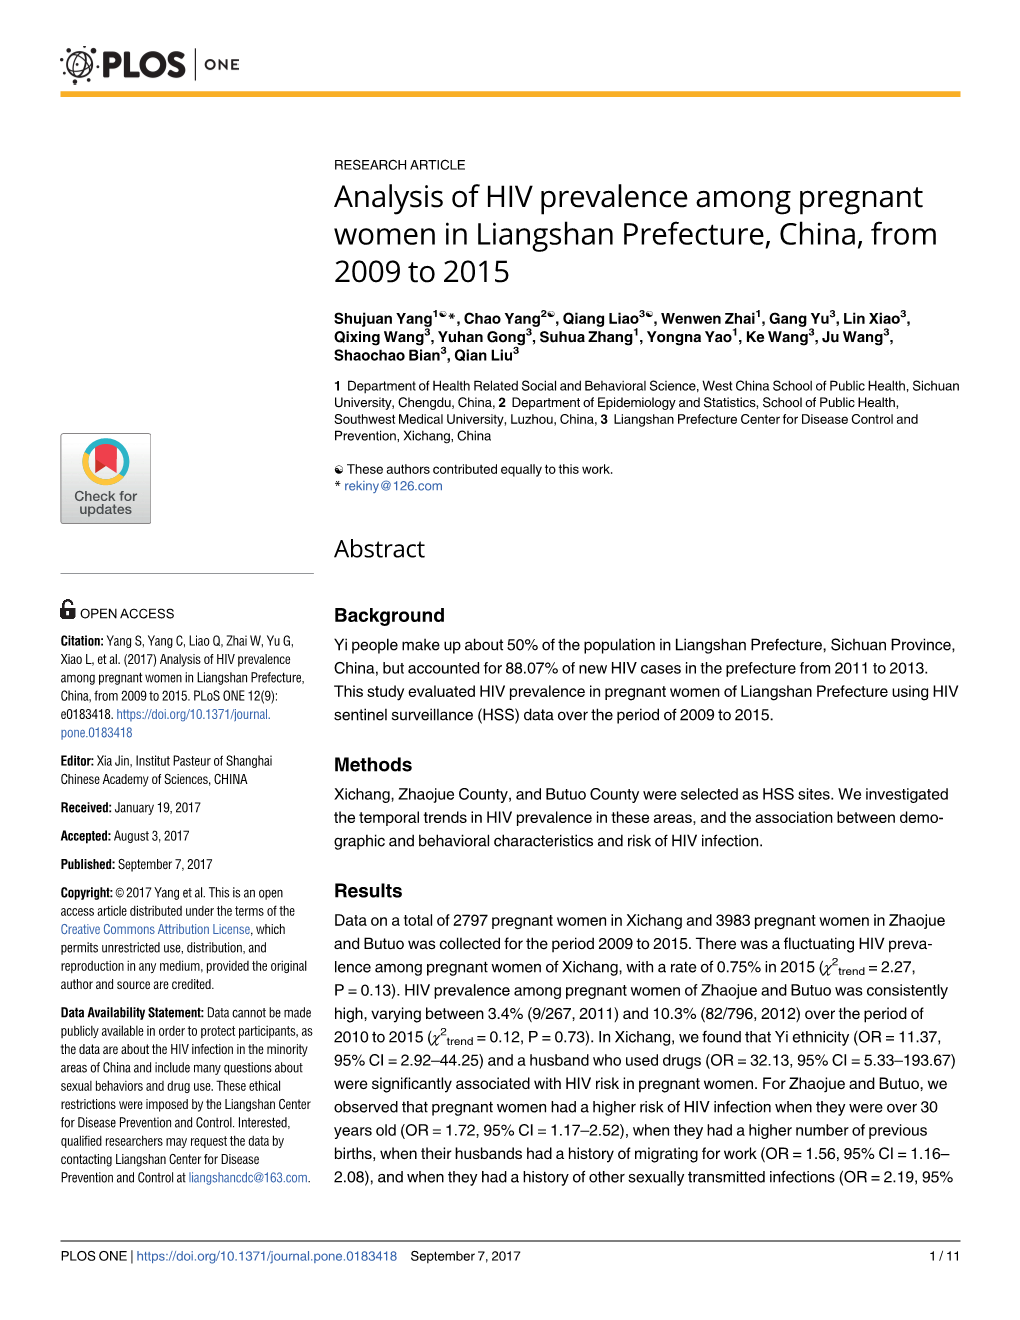 Analysis of HIV Prevalence Among Pregnant Women in Liangshan Prefecture, China, from 2009 to 2015